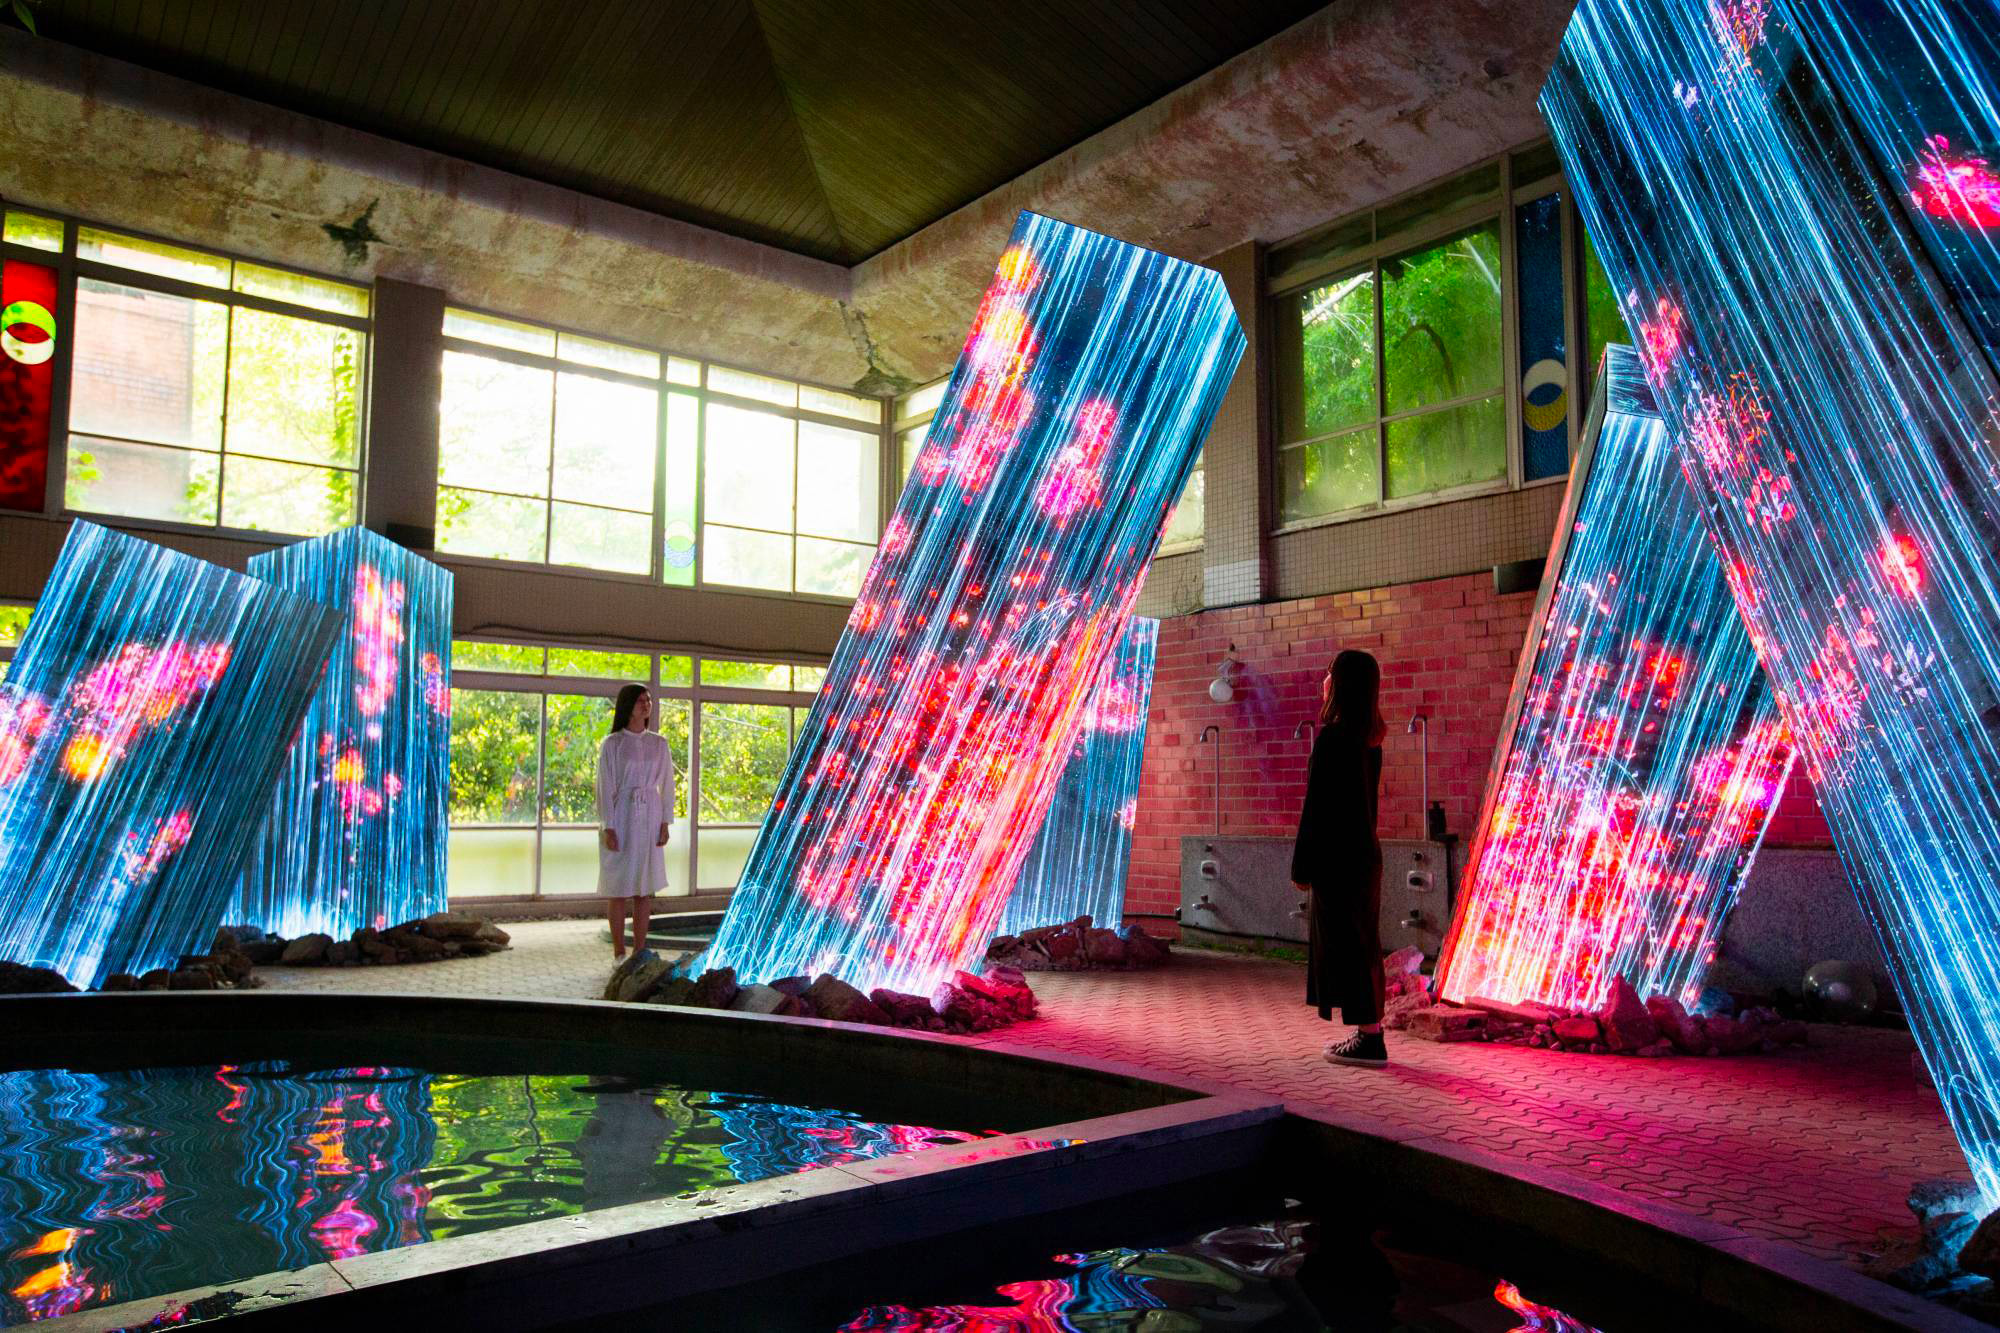 Four Seasons of Flowers Appear to Blossom and Wither in a Responsive Installation by teamLab